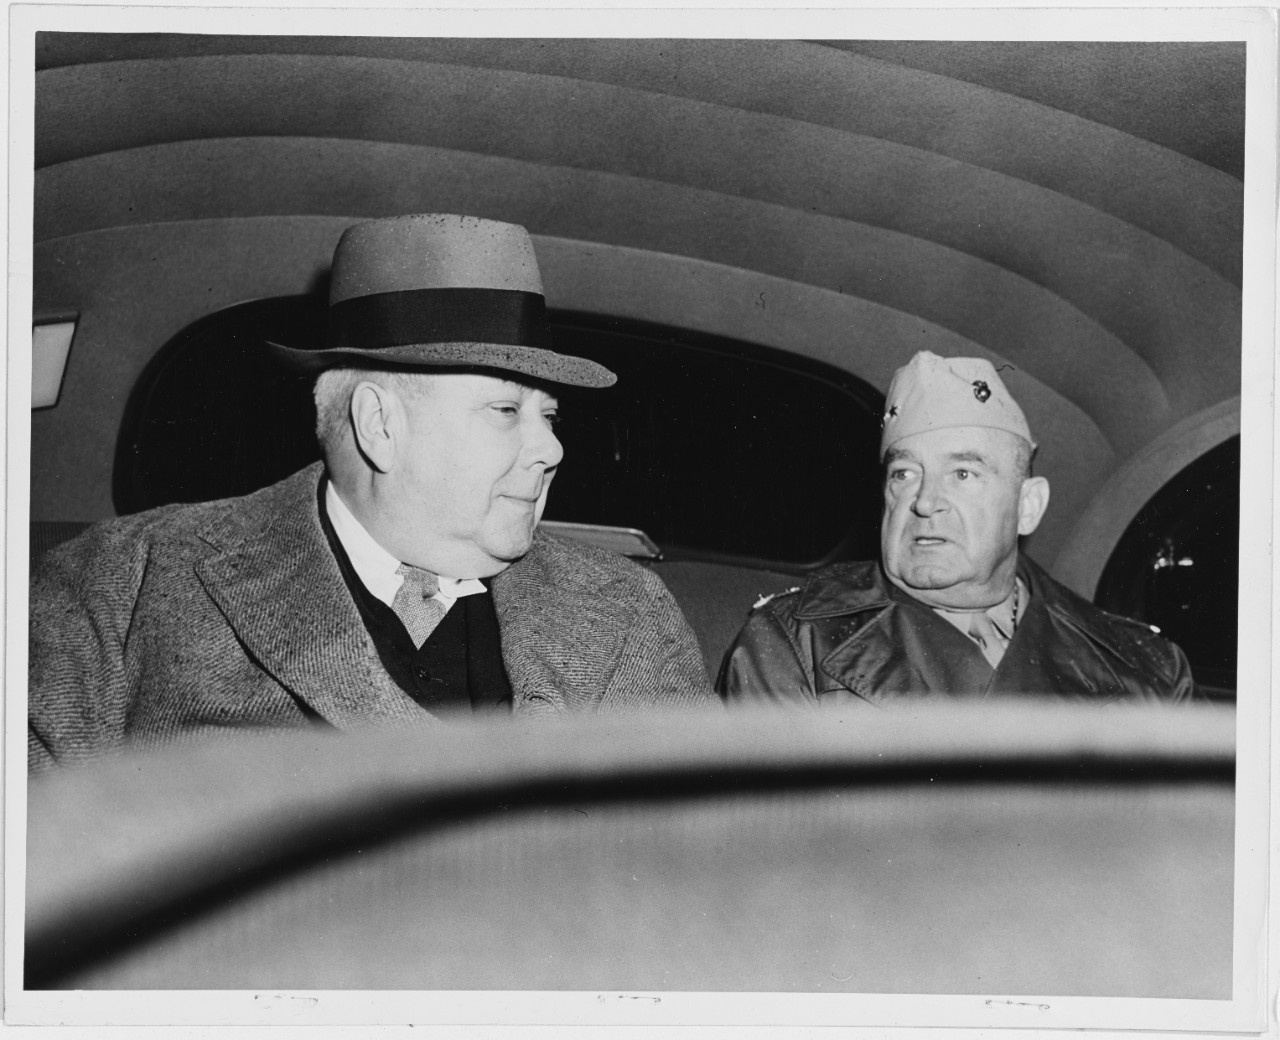 Lee and Vandegrift in Car